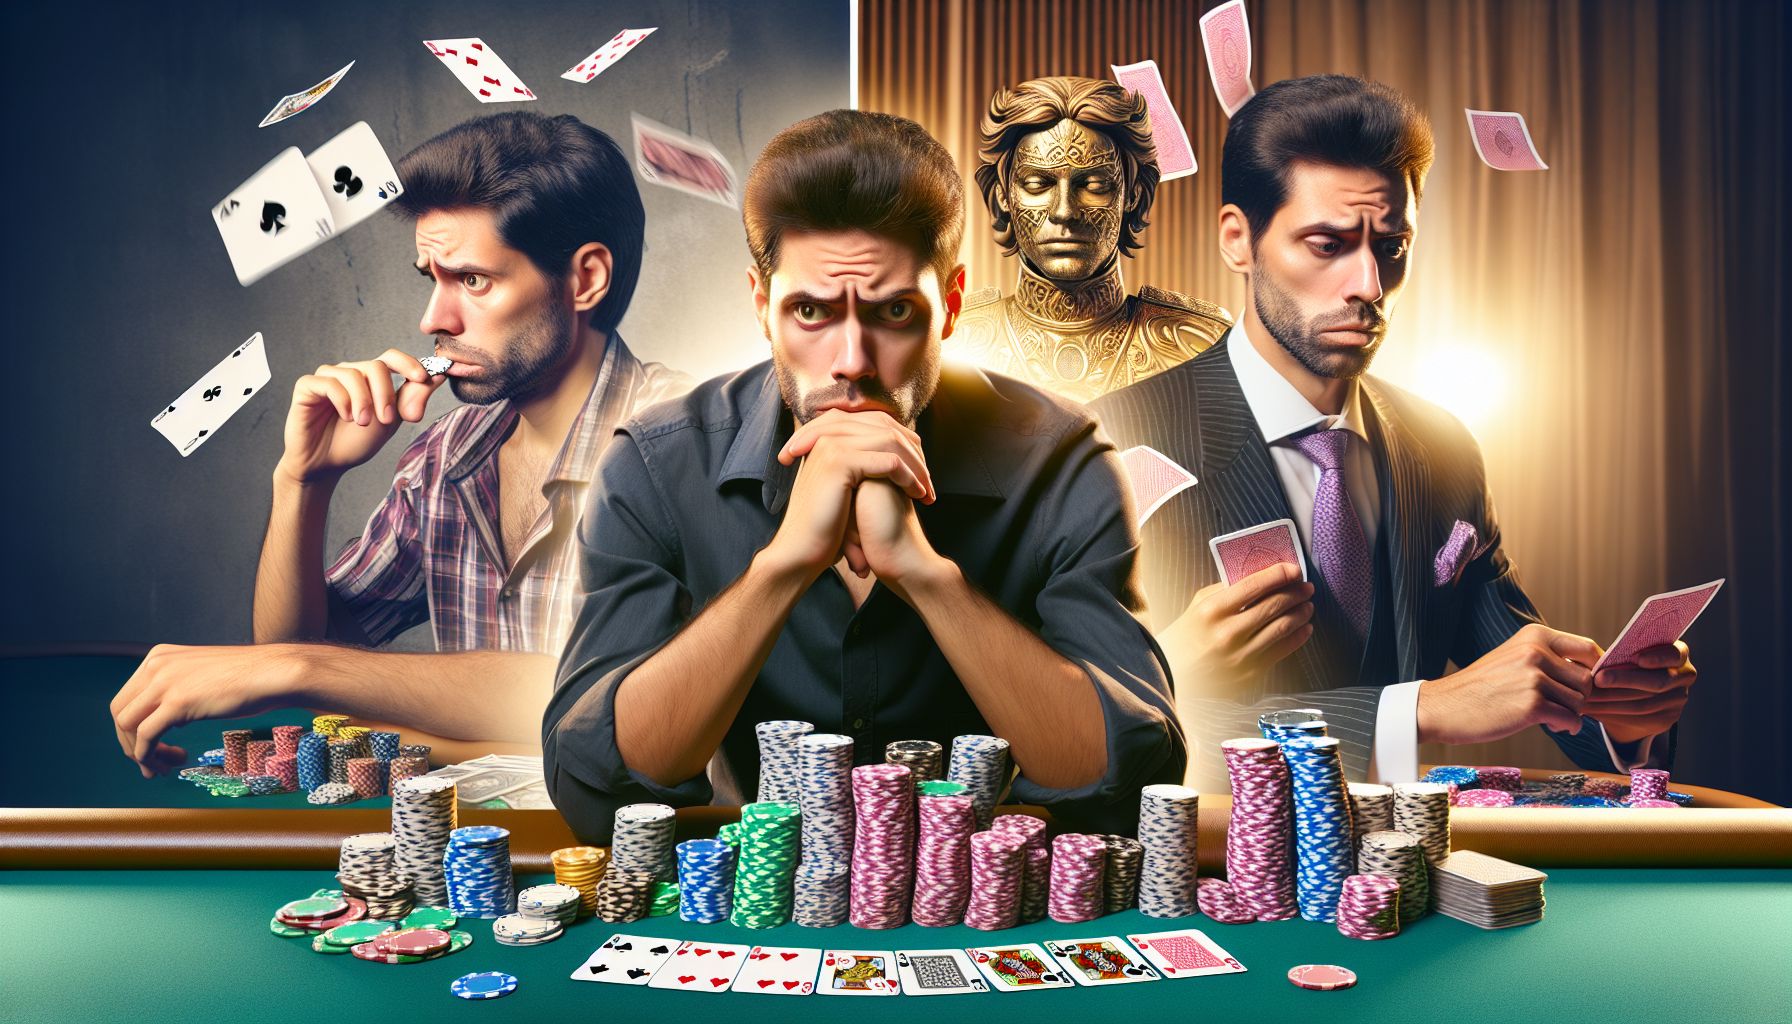 From Novice to Pro: A Journey Through Casino Poker